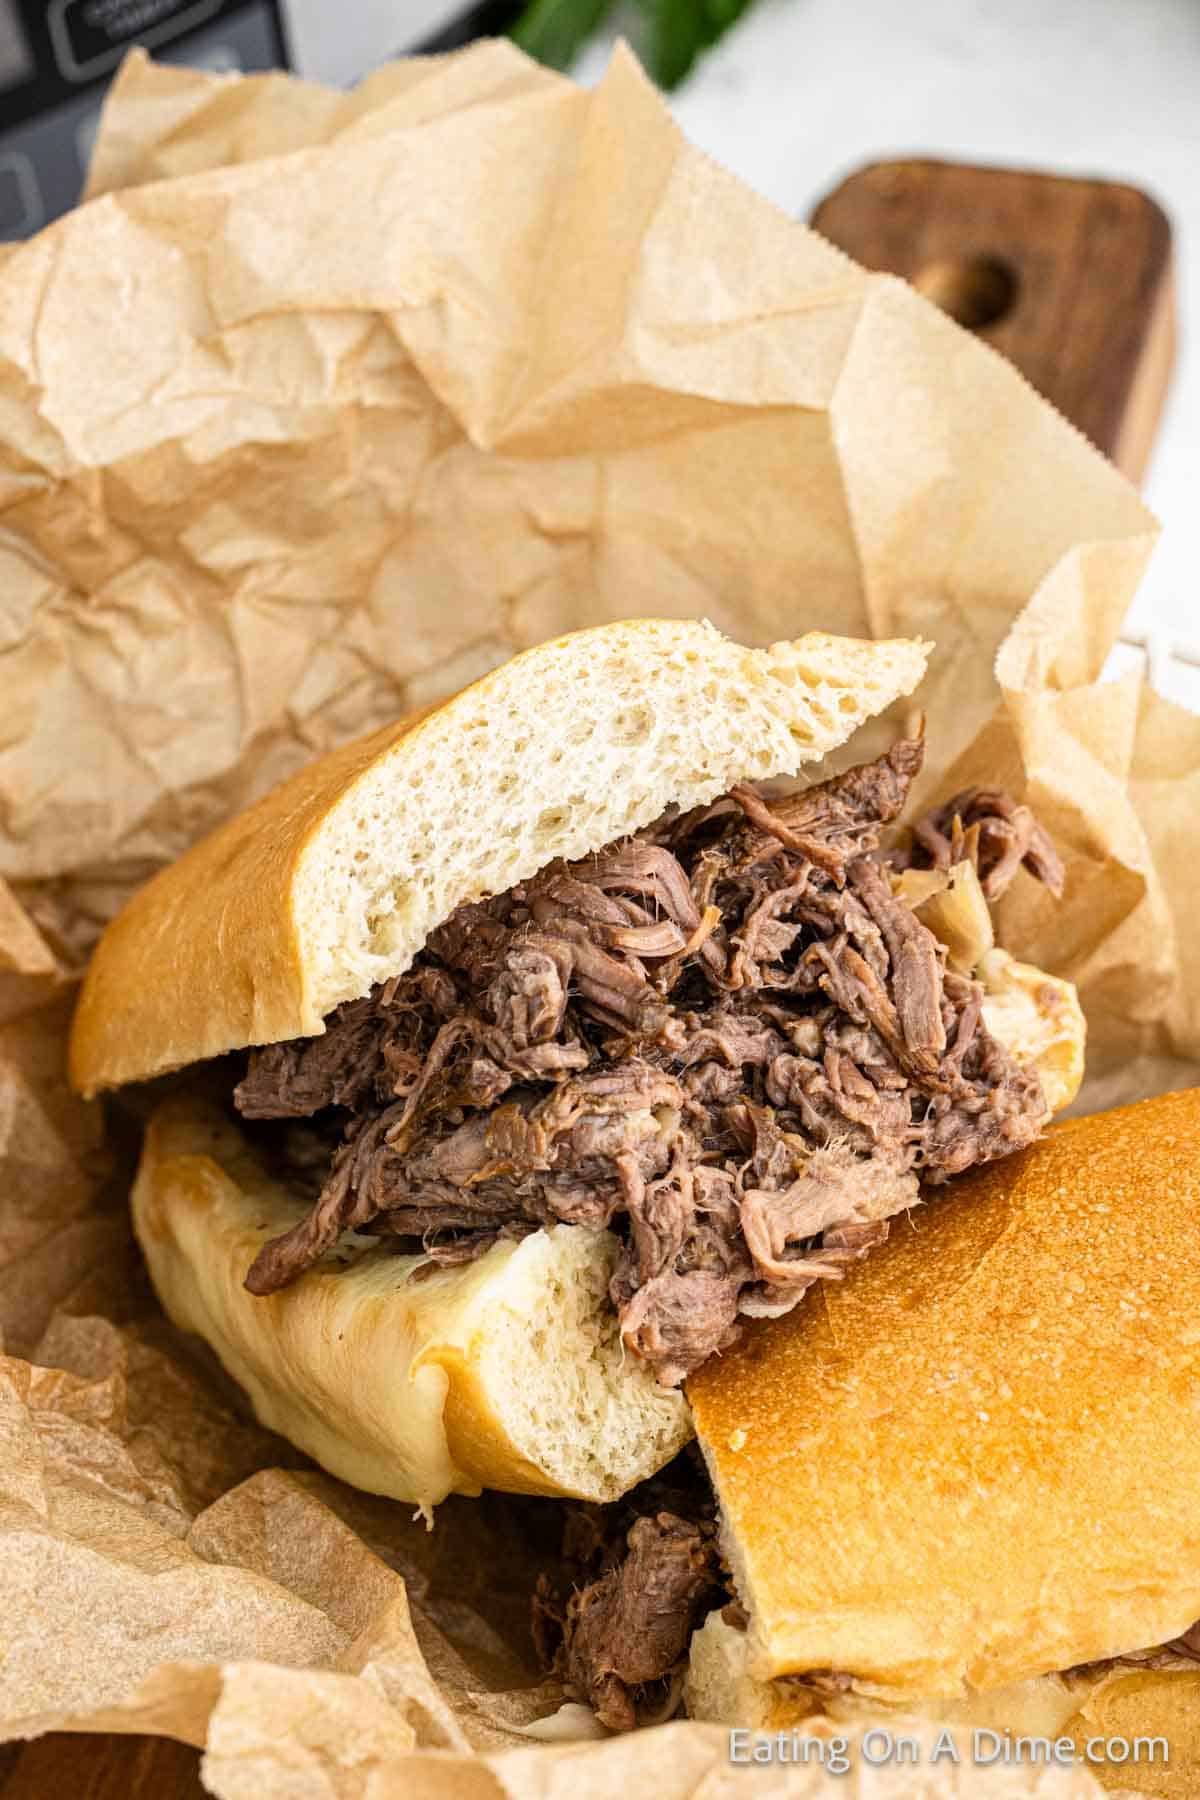 Shredded beef sandwich wrapped in parchment paper